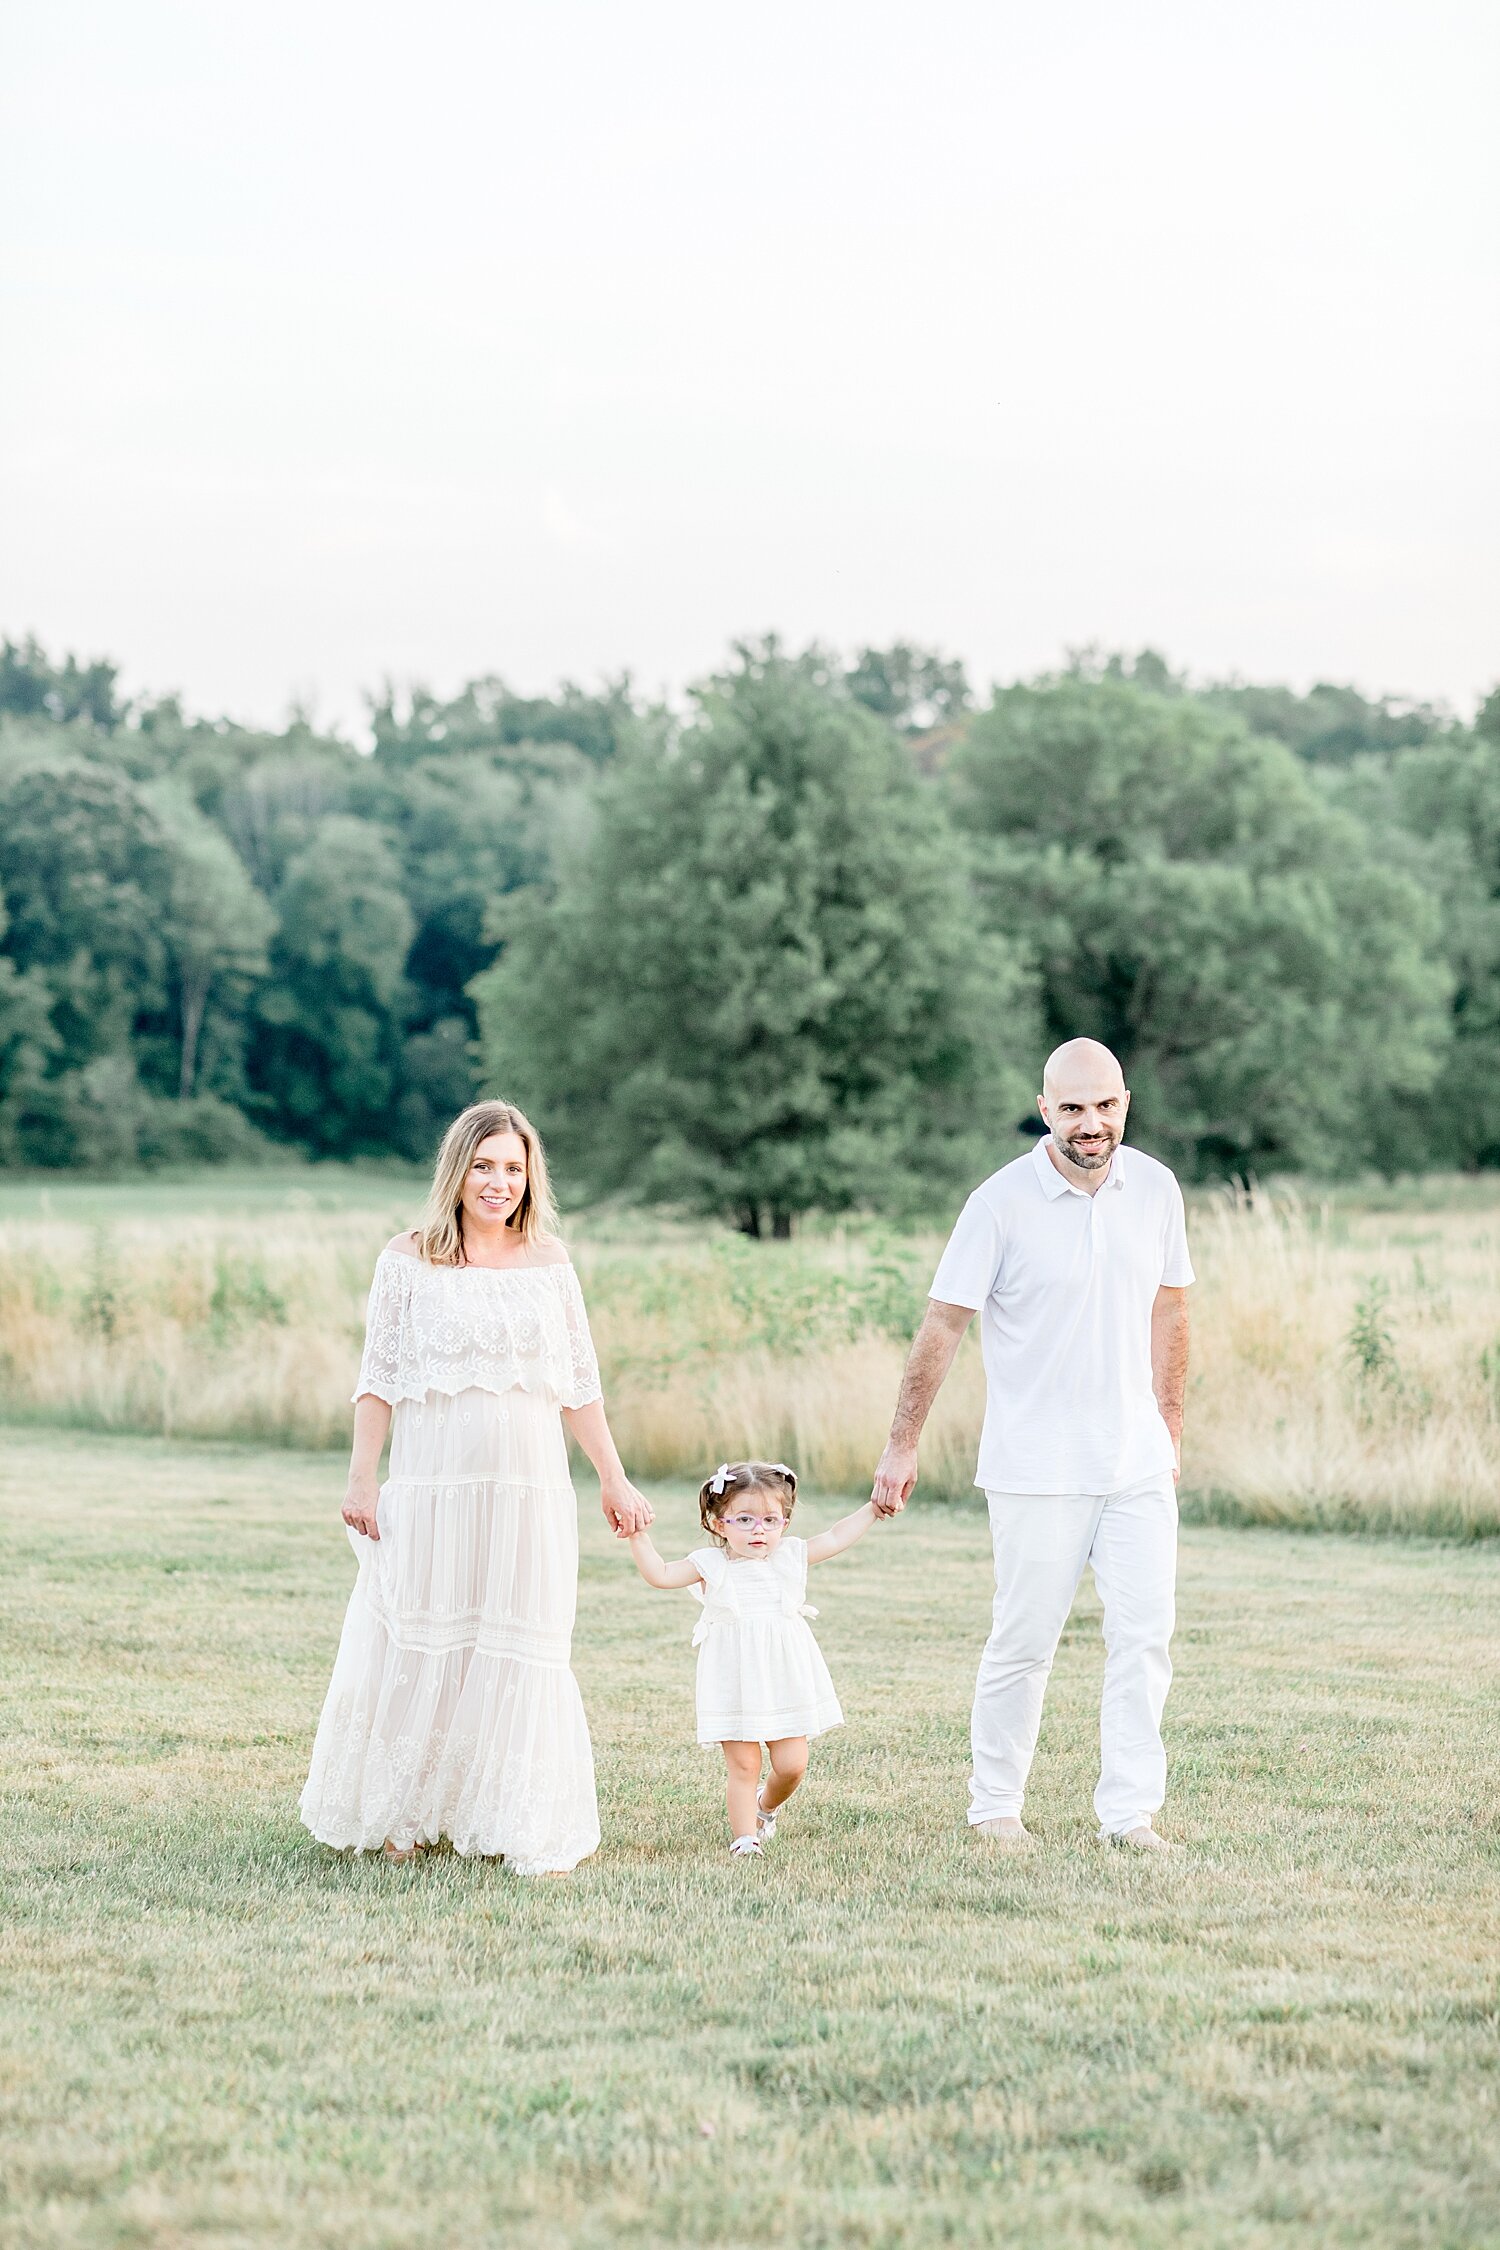 Family walking through the field at Waveny Park in Darien, CT. Maternity photos by Kristin Wood Photography.